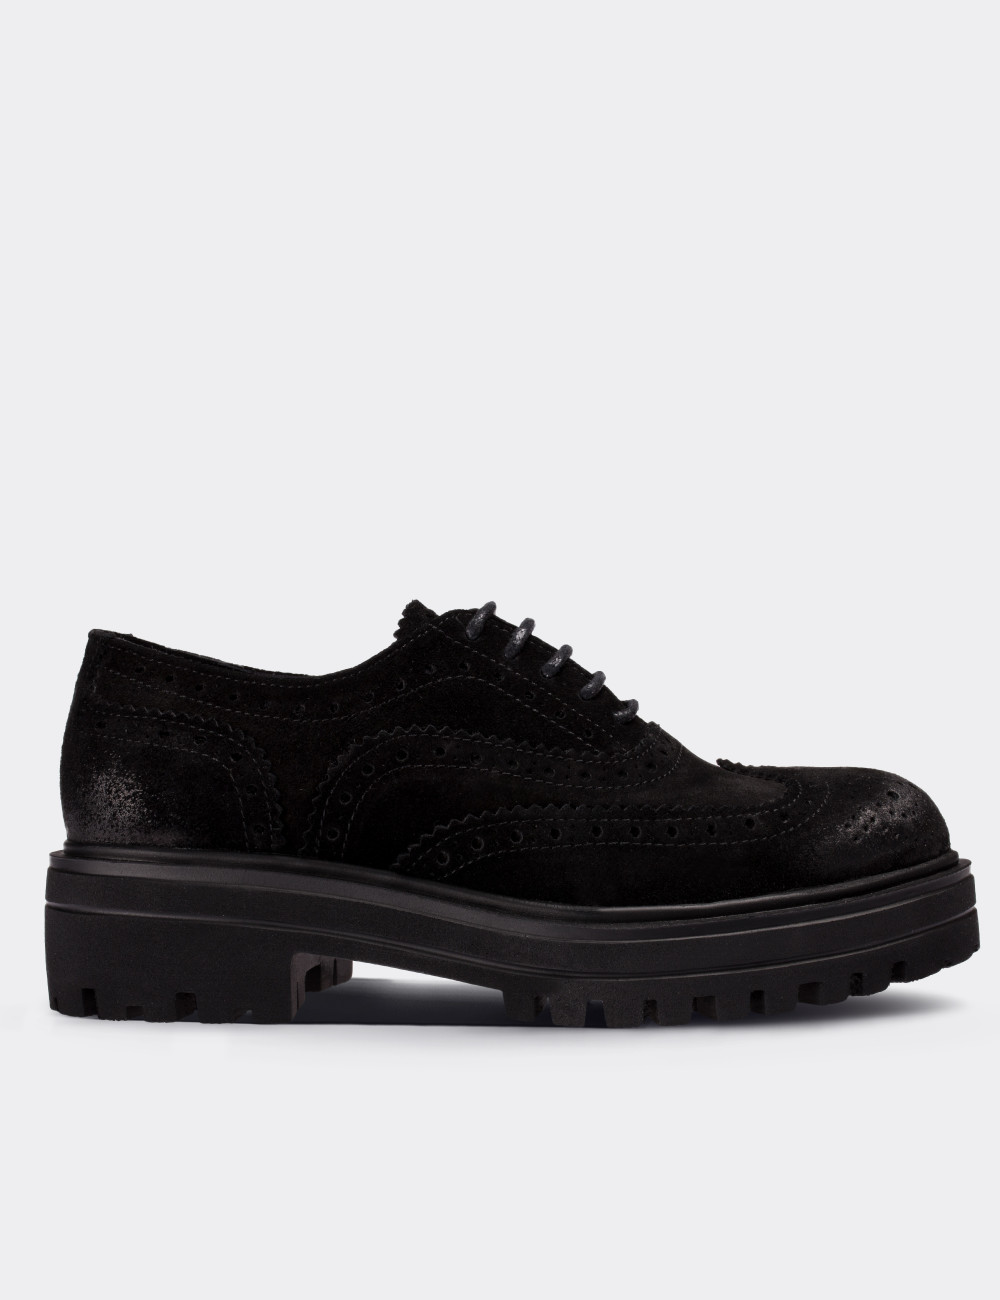 Black Suede Calfskin Lace-up Shoes - Deery